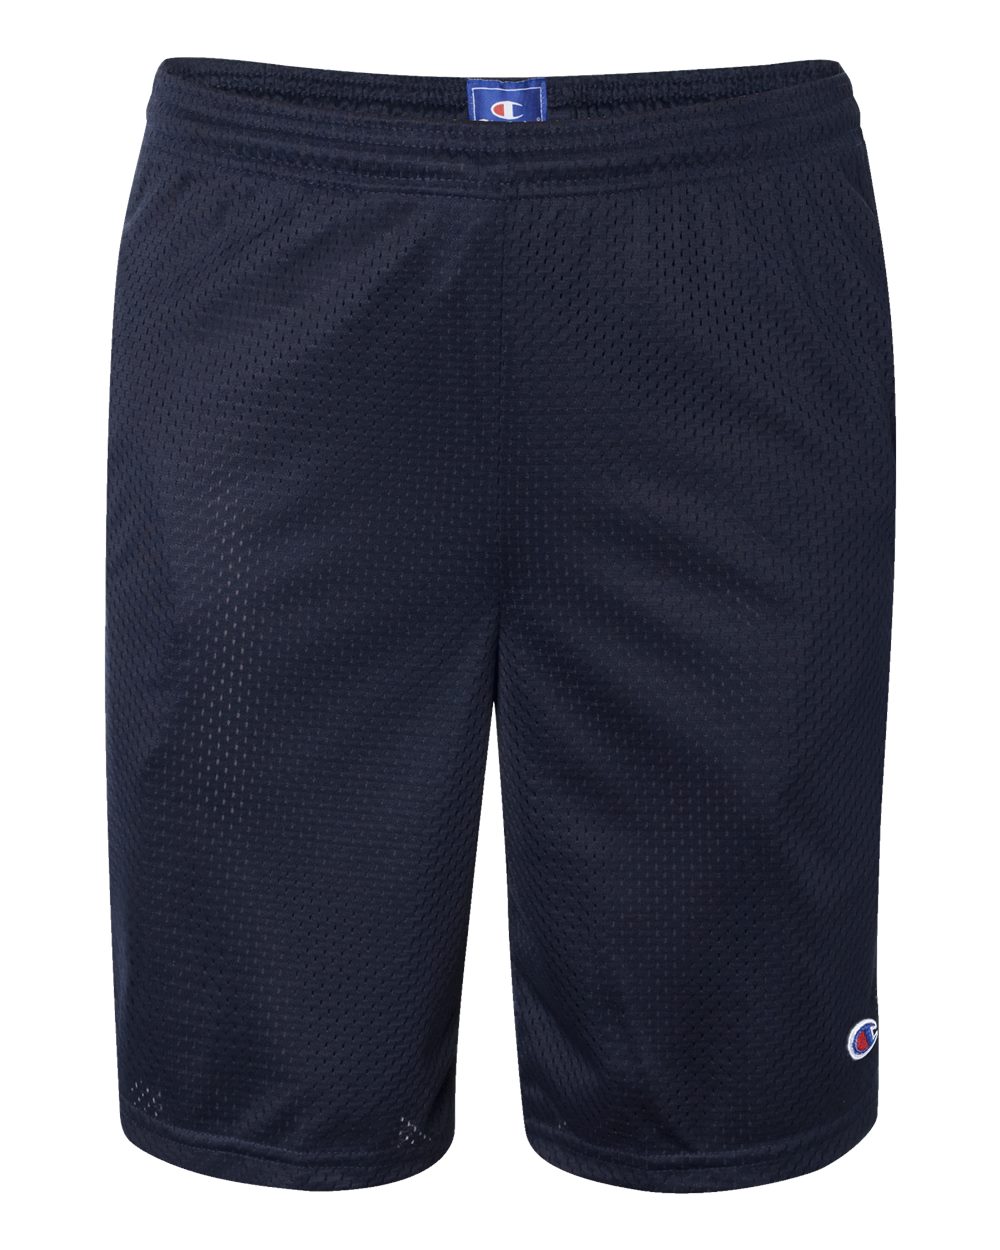 Champion Mens Mesh Sport Shorts Workout with Pockets 9